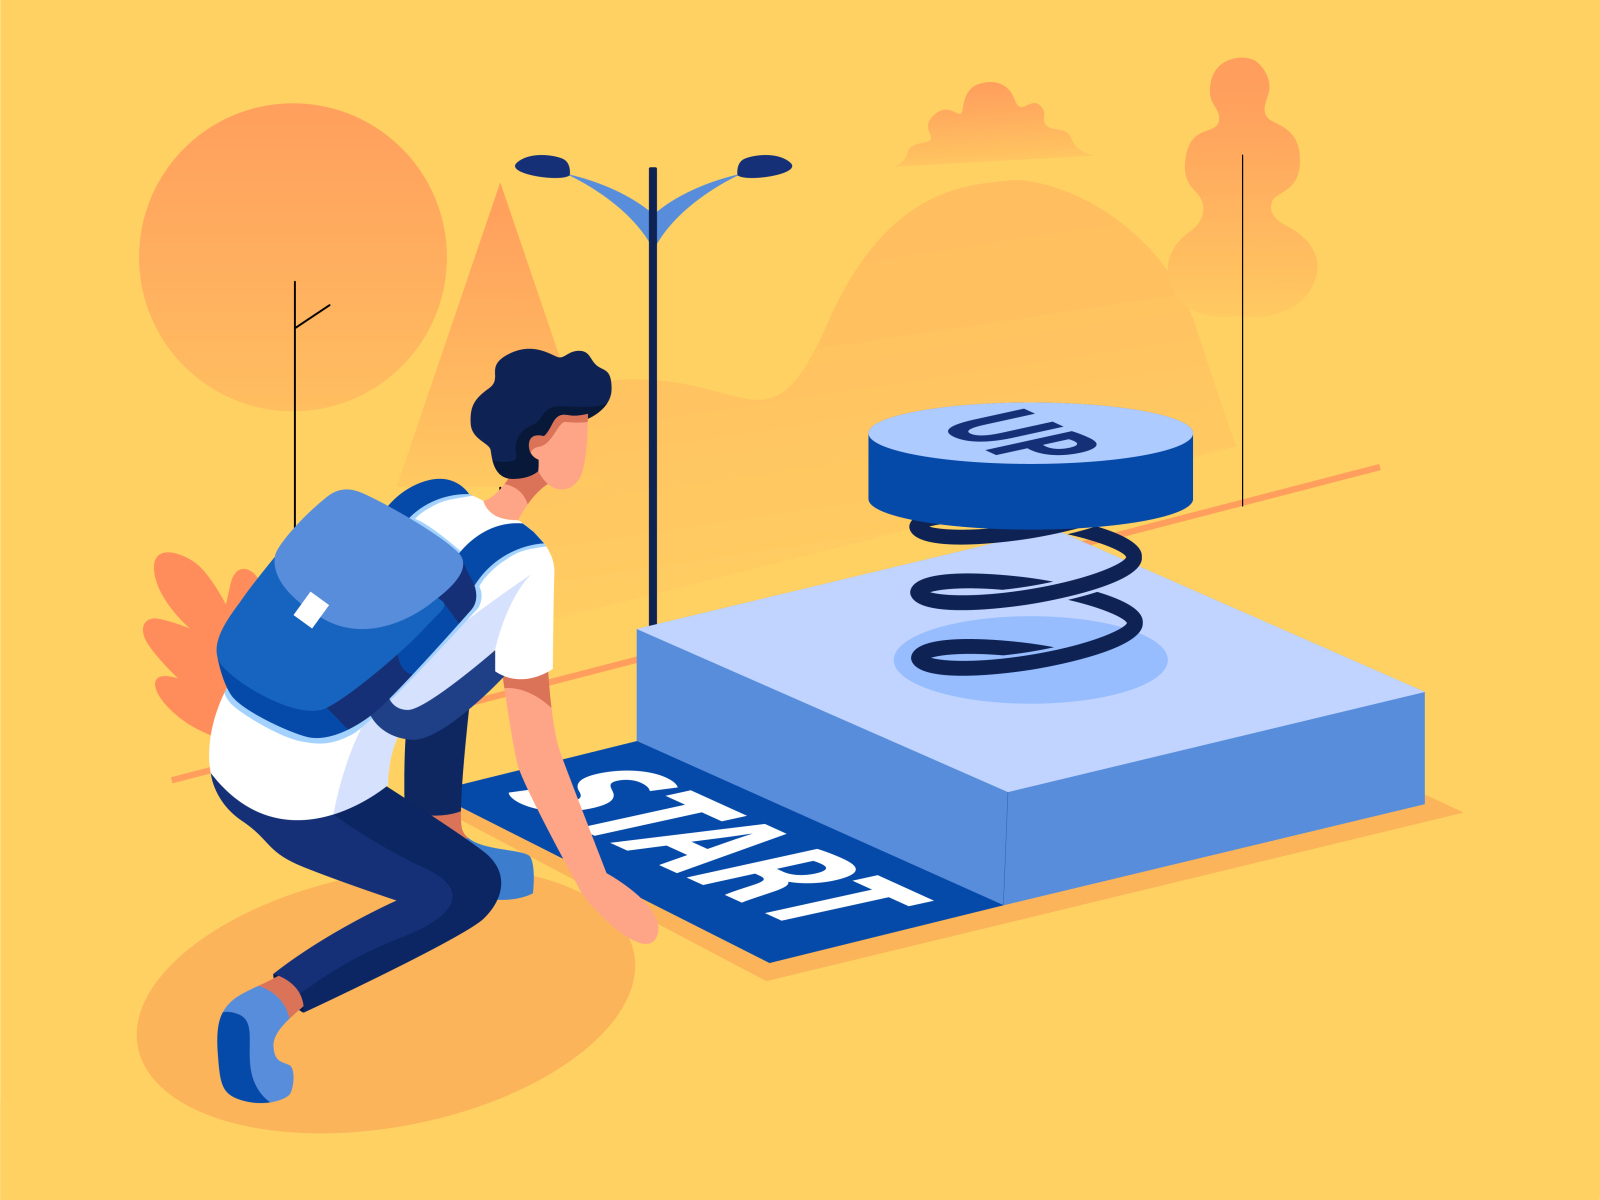 Startup Business illustration concept by HoangPts on Dribbble